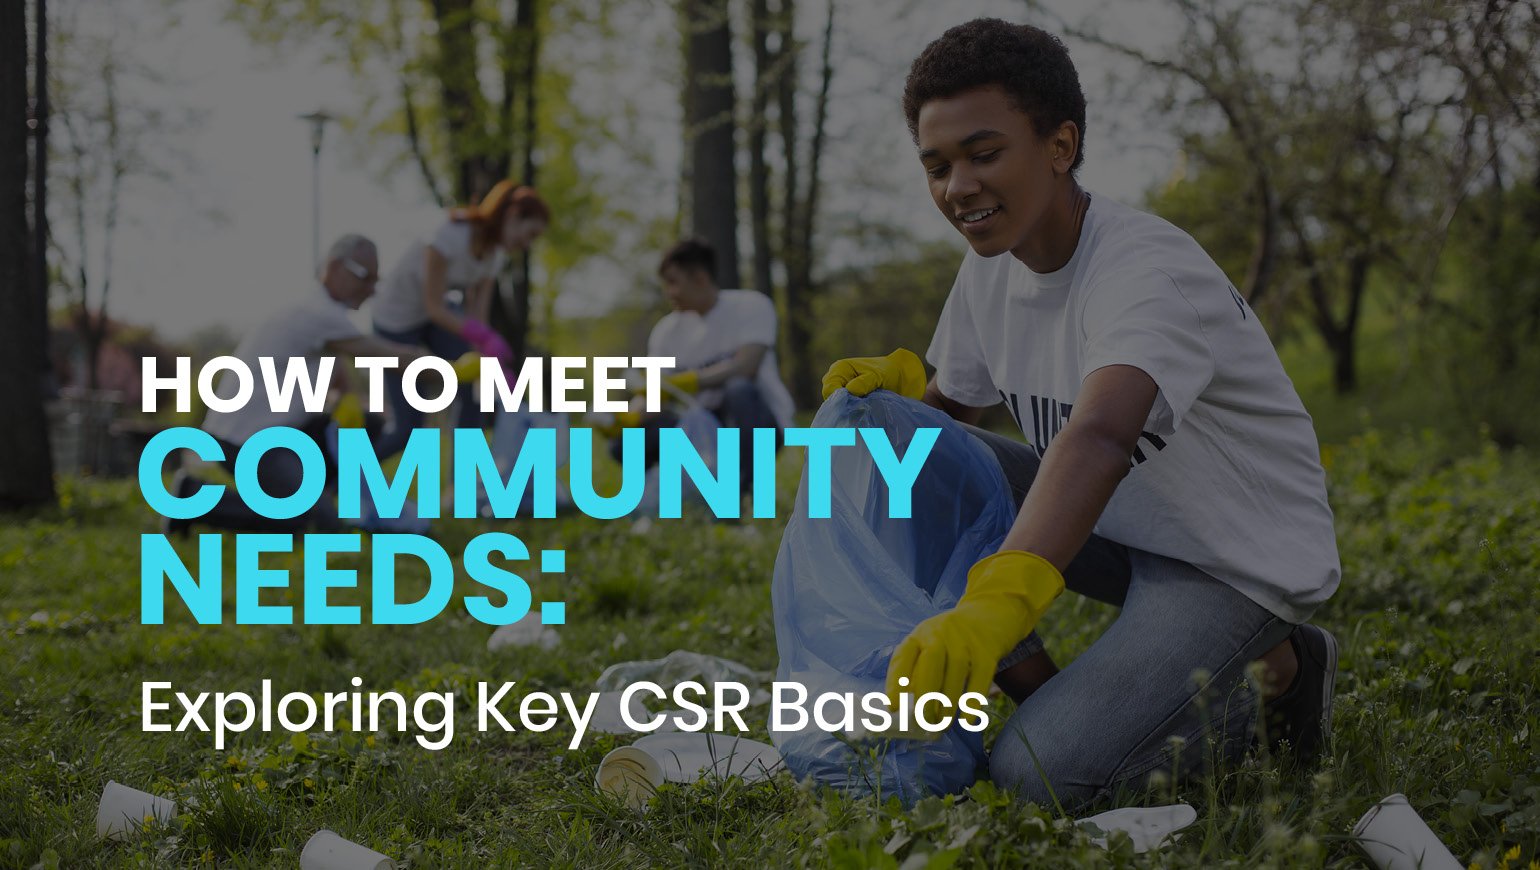 This article talks about corporate social responsibility basics and gives tips for meeting community needs.